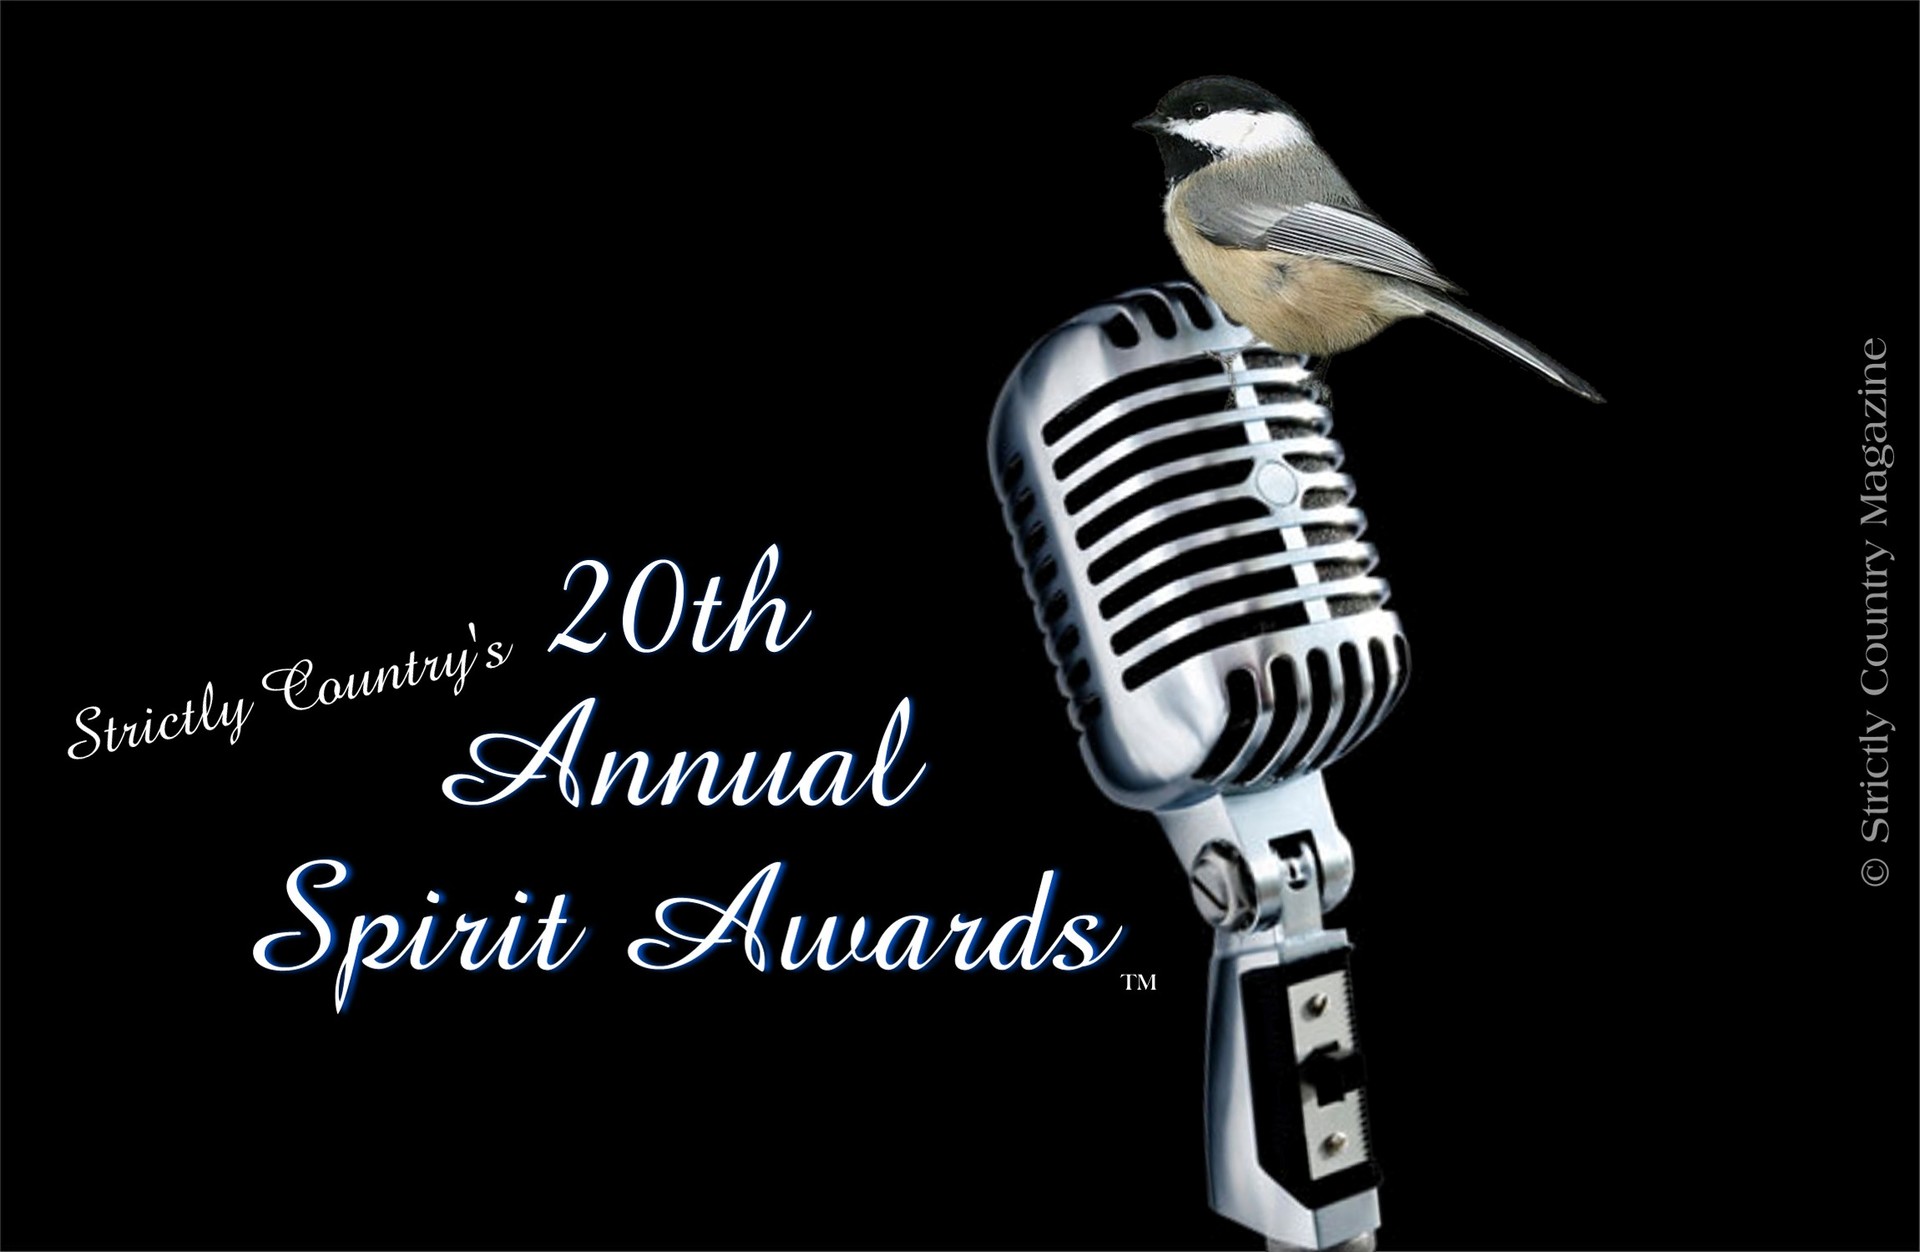 Strictly Country Magazine copyright 20th Annual Spirit Awards official logo